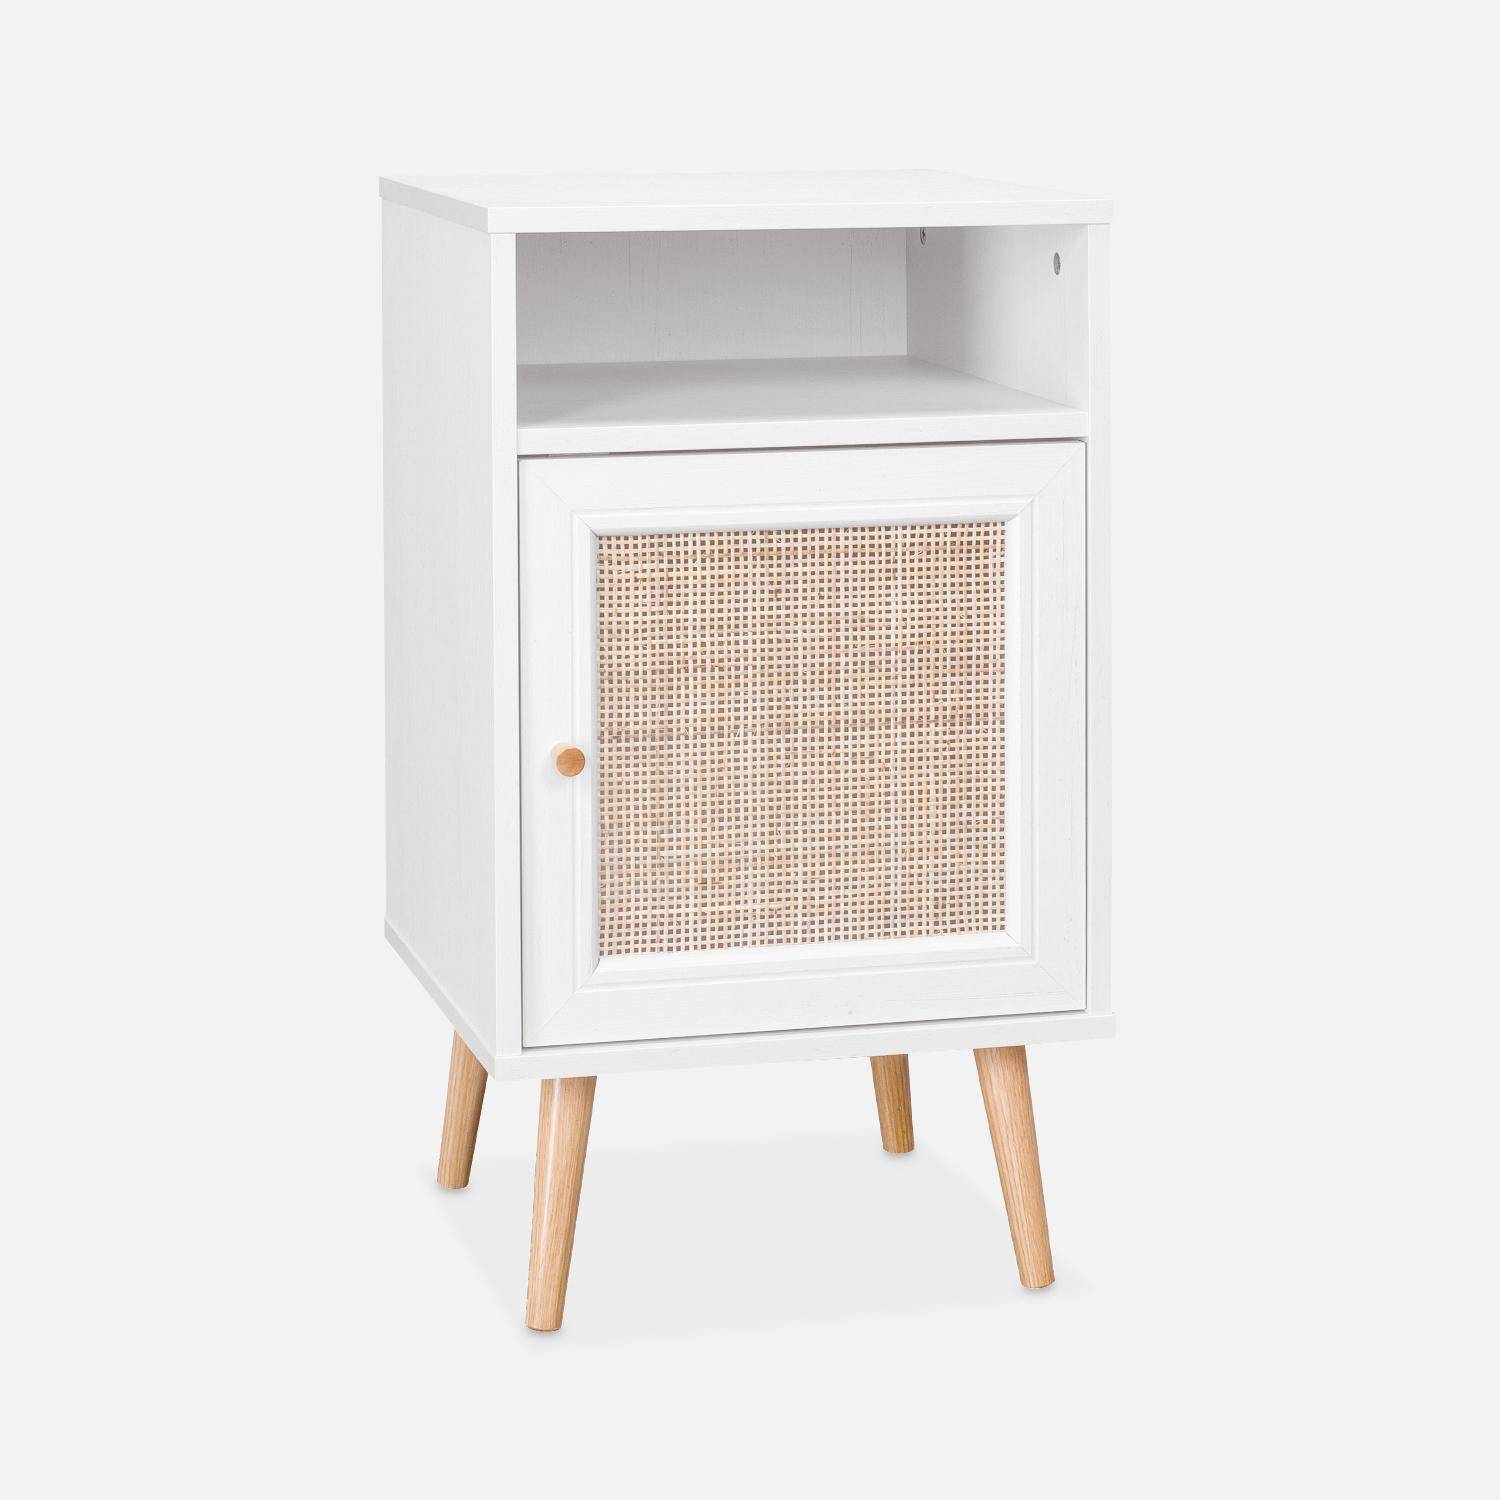 Scandi-style wood and cane rattan bedside table with cupboard, 40x39x70cm - Boheme - White Photo3